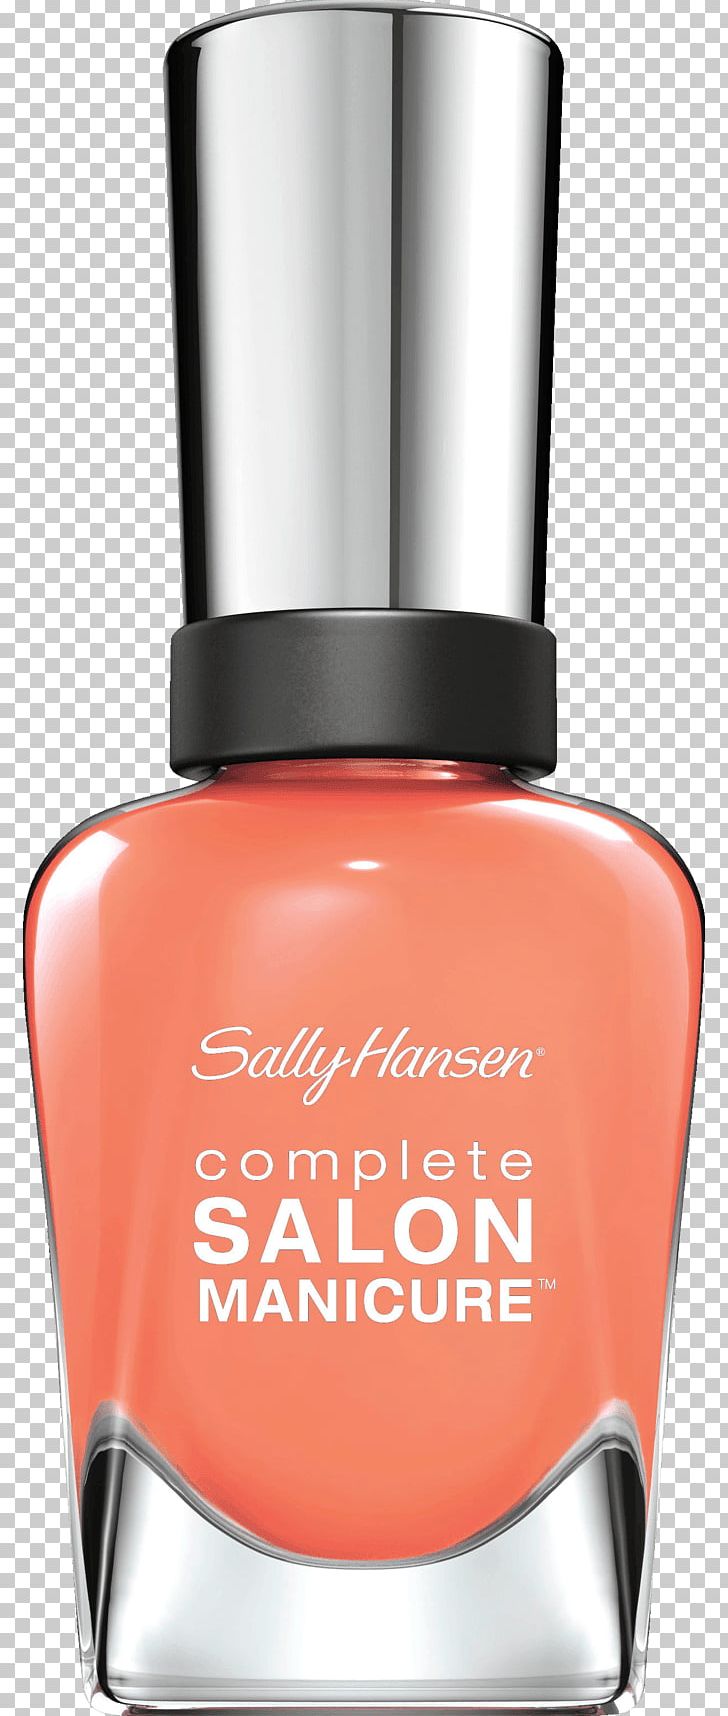 Sally Hansen Complete Salon Manicure Nail Color Nail Polish Cosmetics PNG, Clipart, Accessories, Beauty, Beauty Parlour, Chanel Le Vernis, Color Free PNG Download